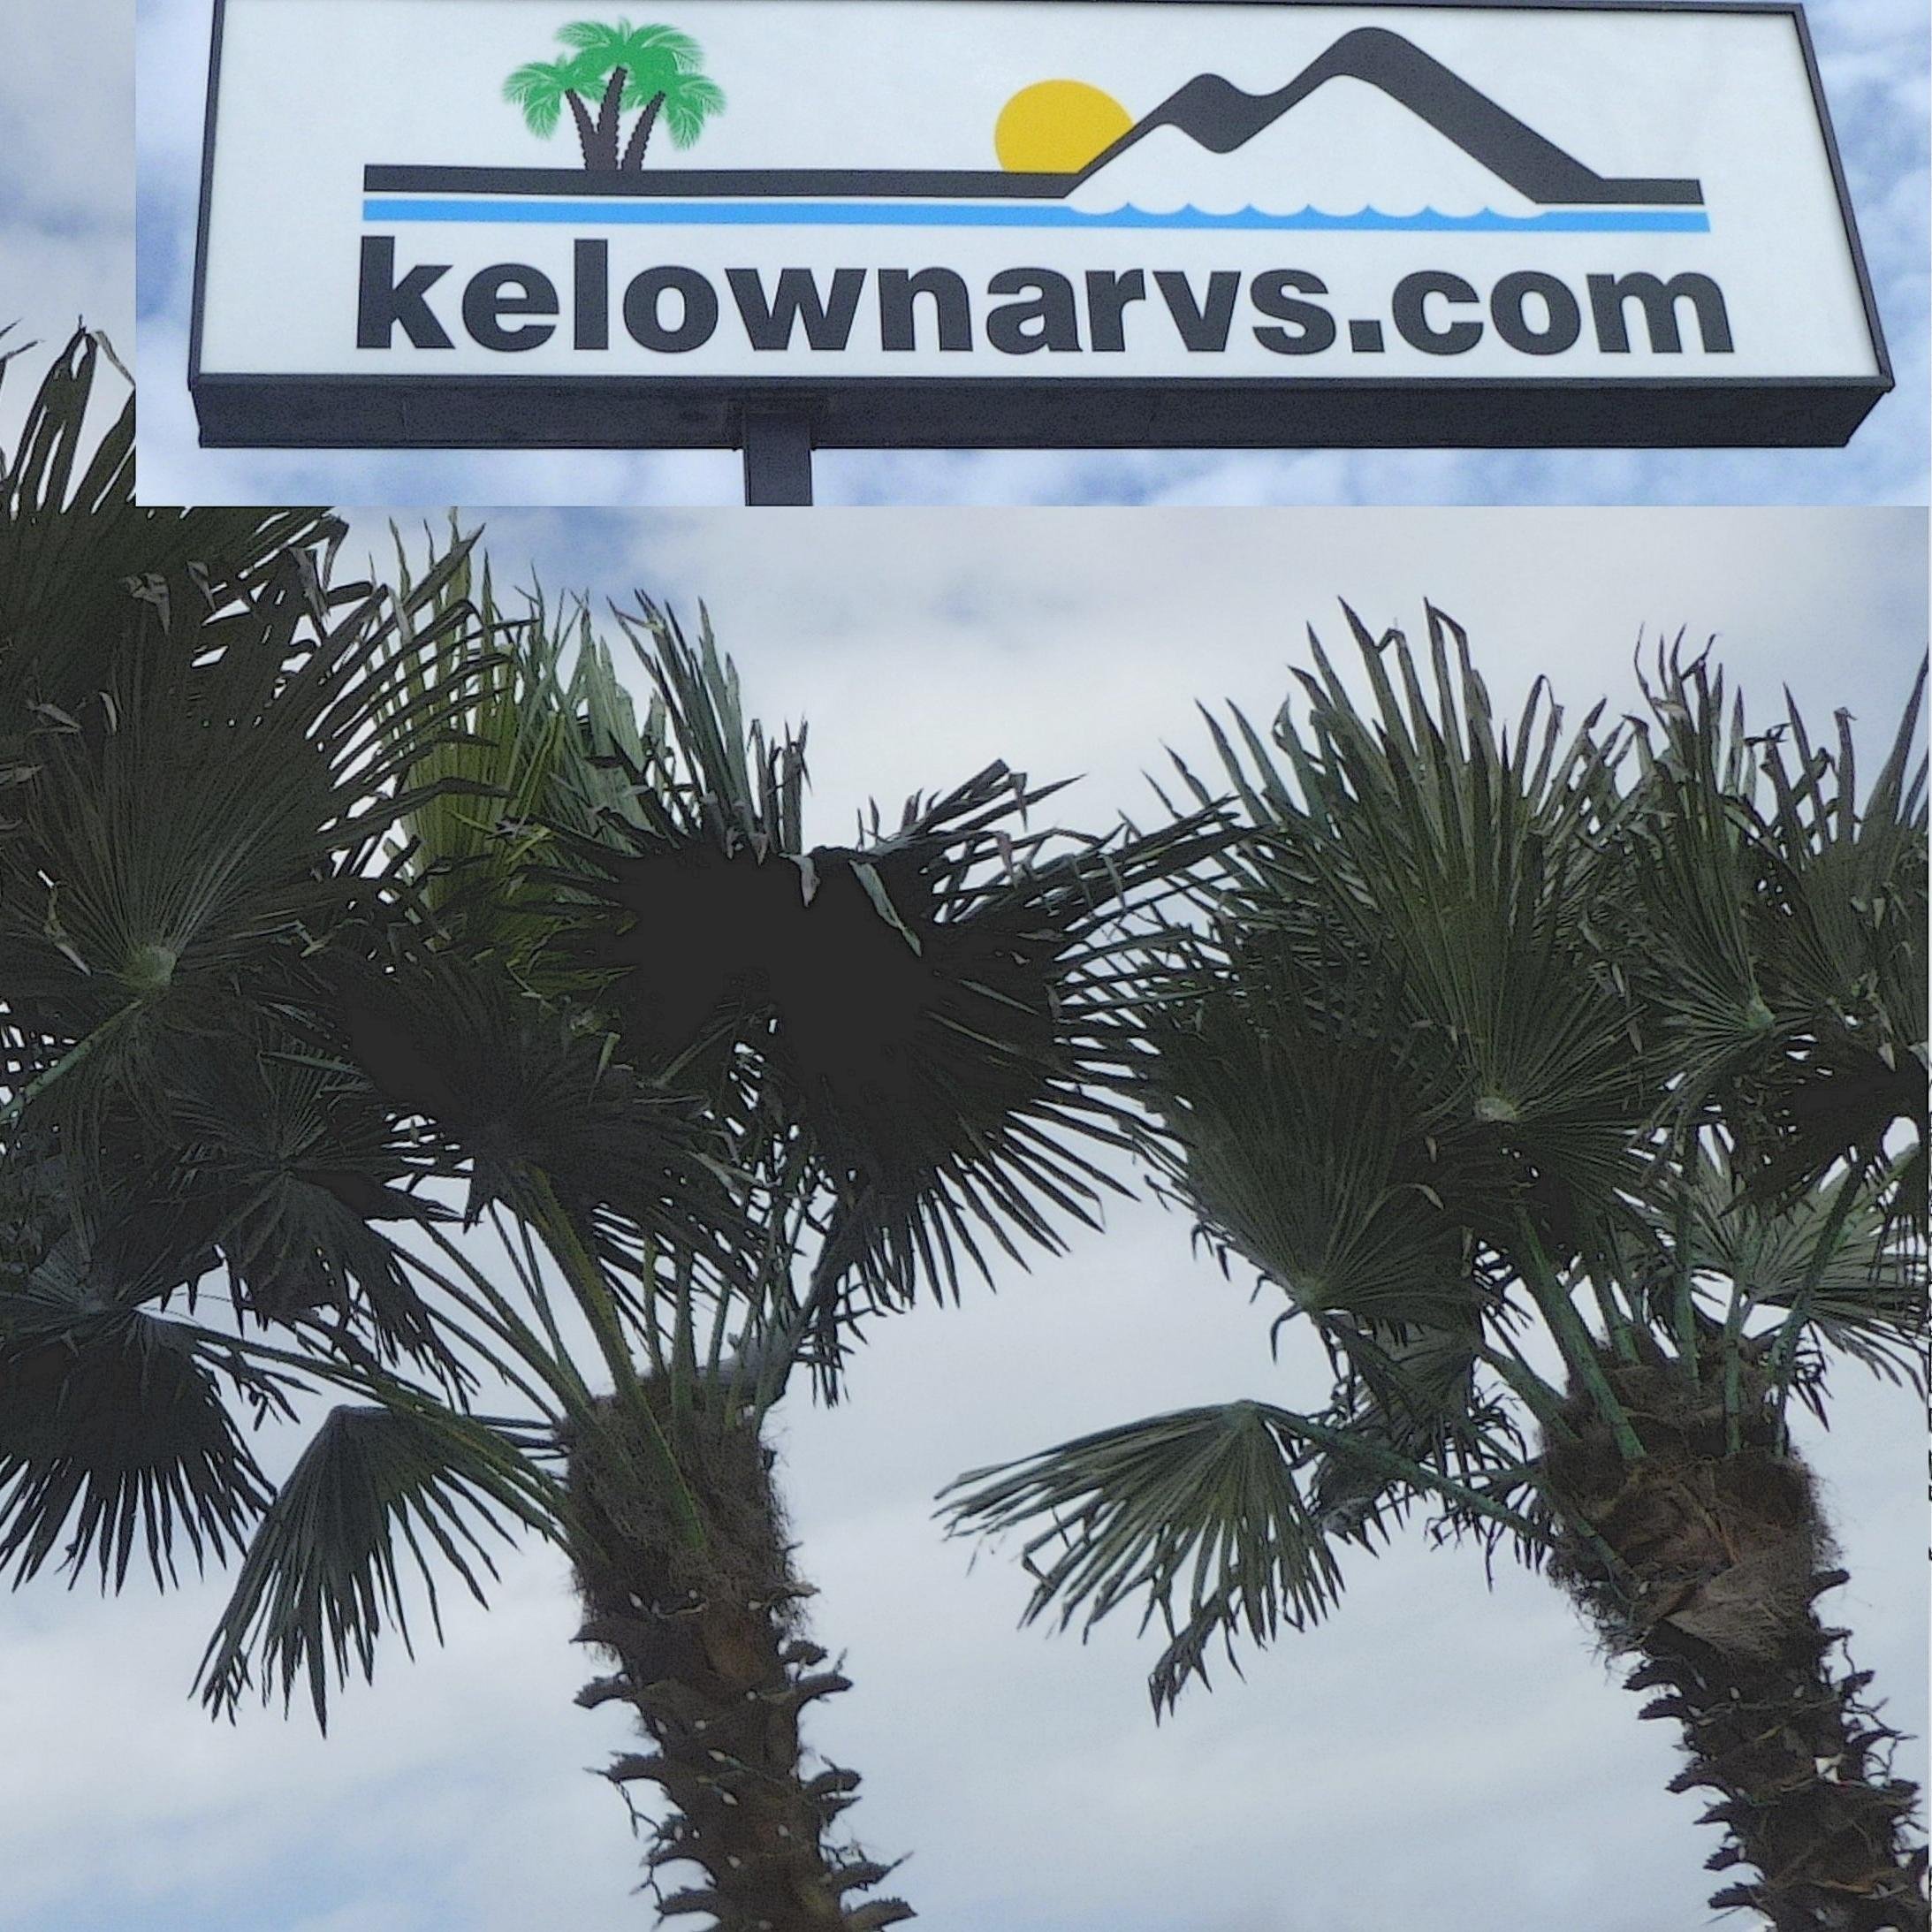 Kelowna RVs is your #1 resource for new and used rv sales, rv parts and rv service AND the exclusive dealer for Outdoors RV in the Okanagan!